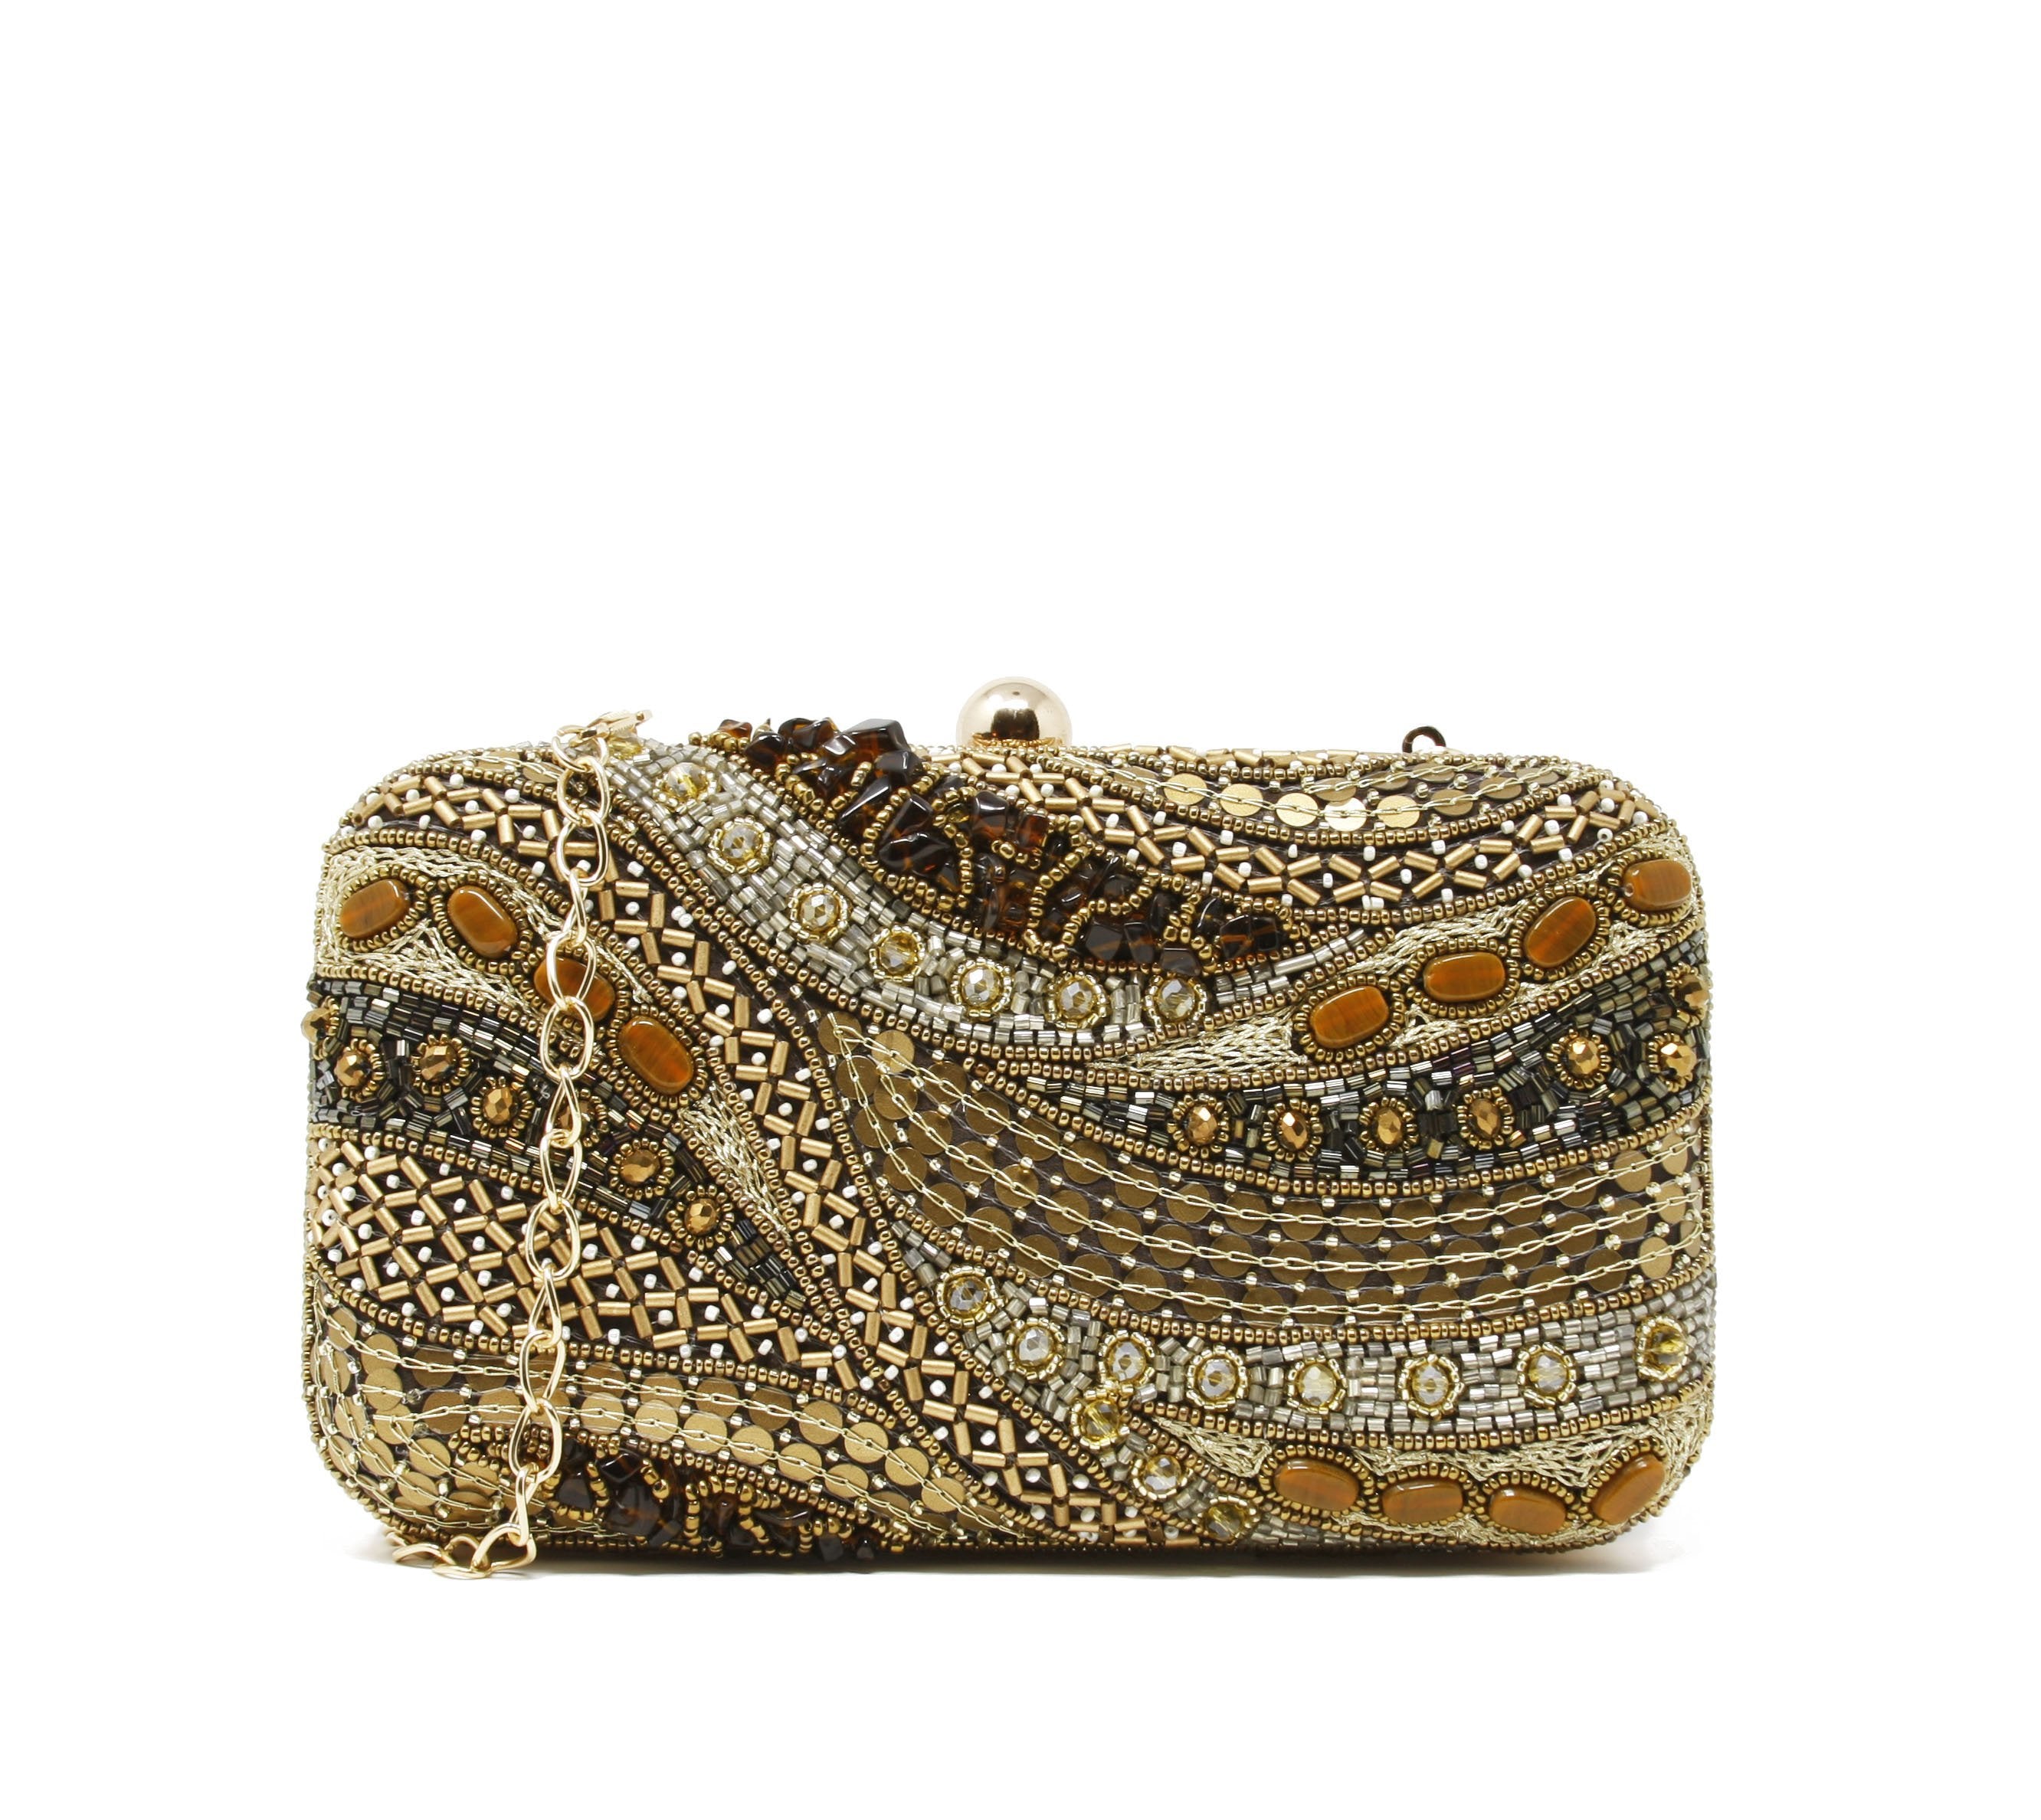 Sparkly gold and shades of brown clutch and evening bag